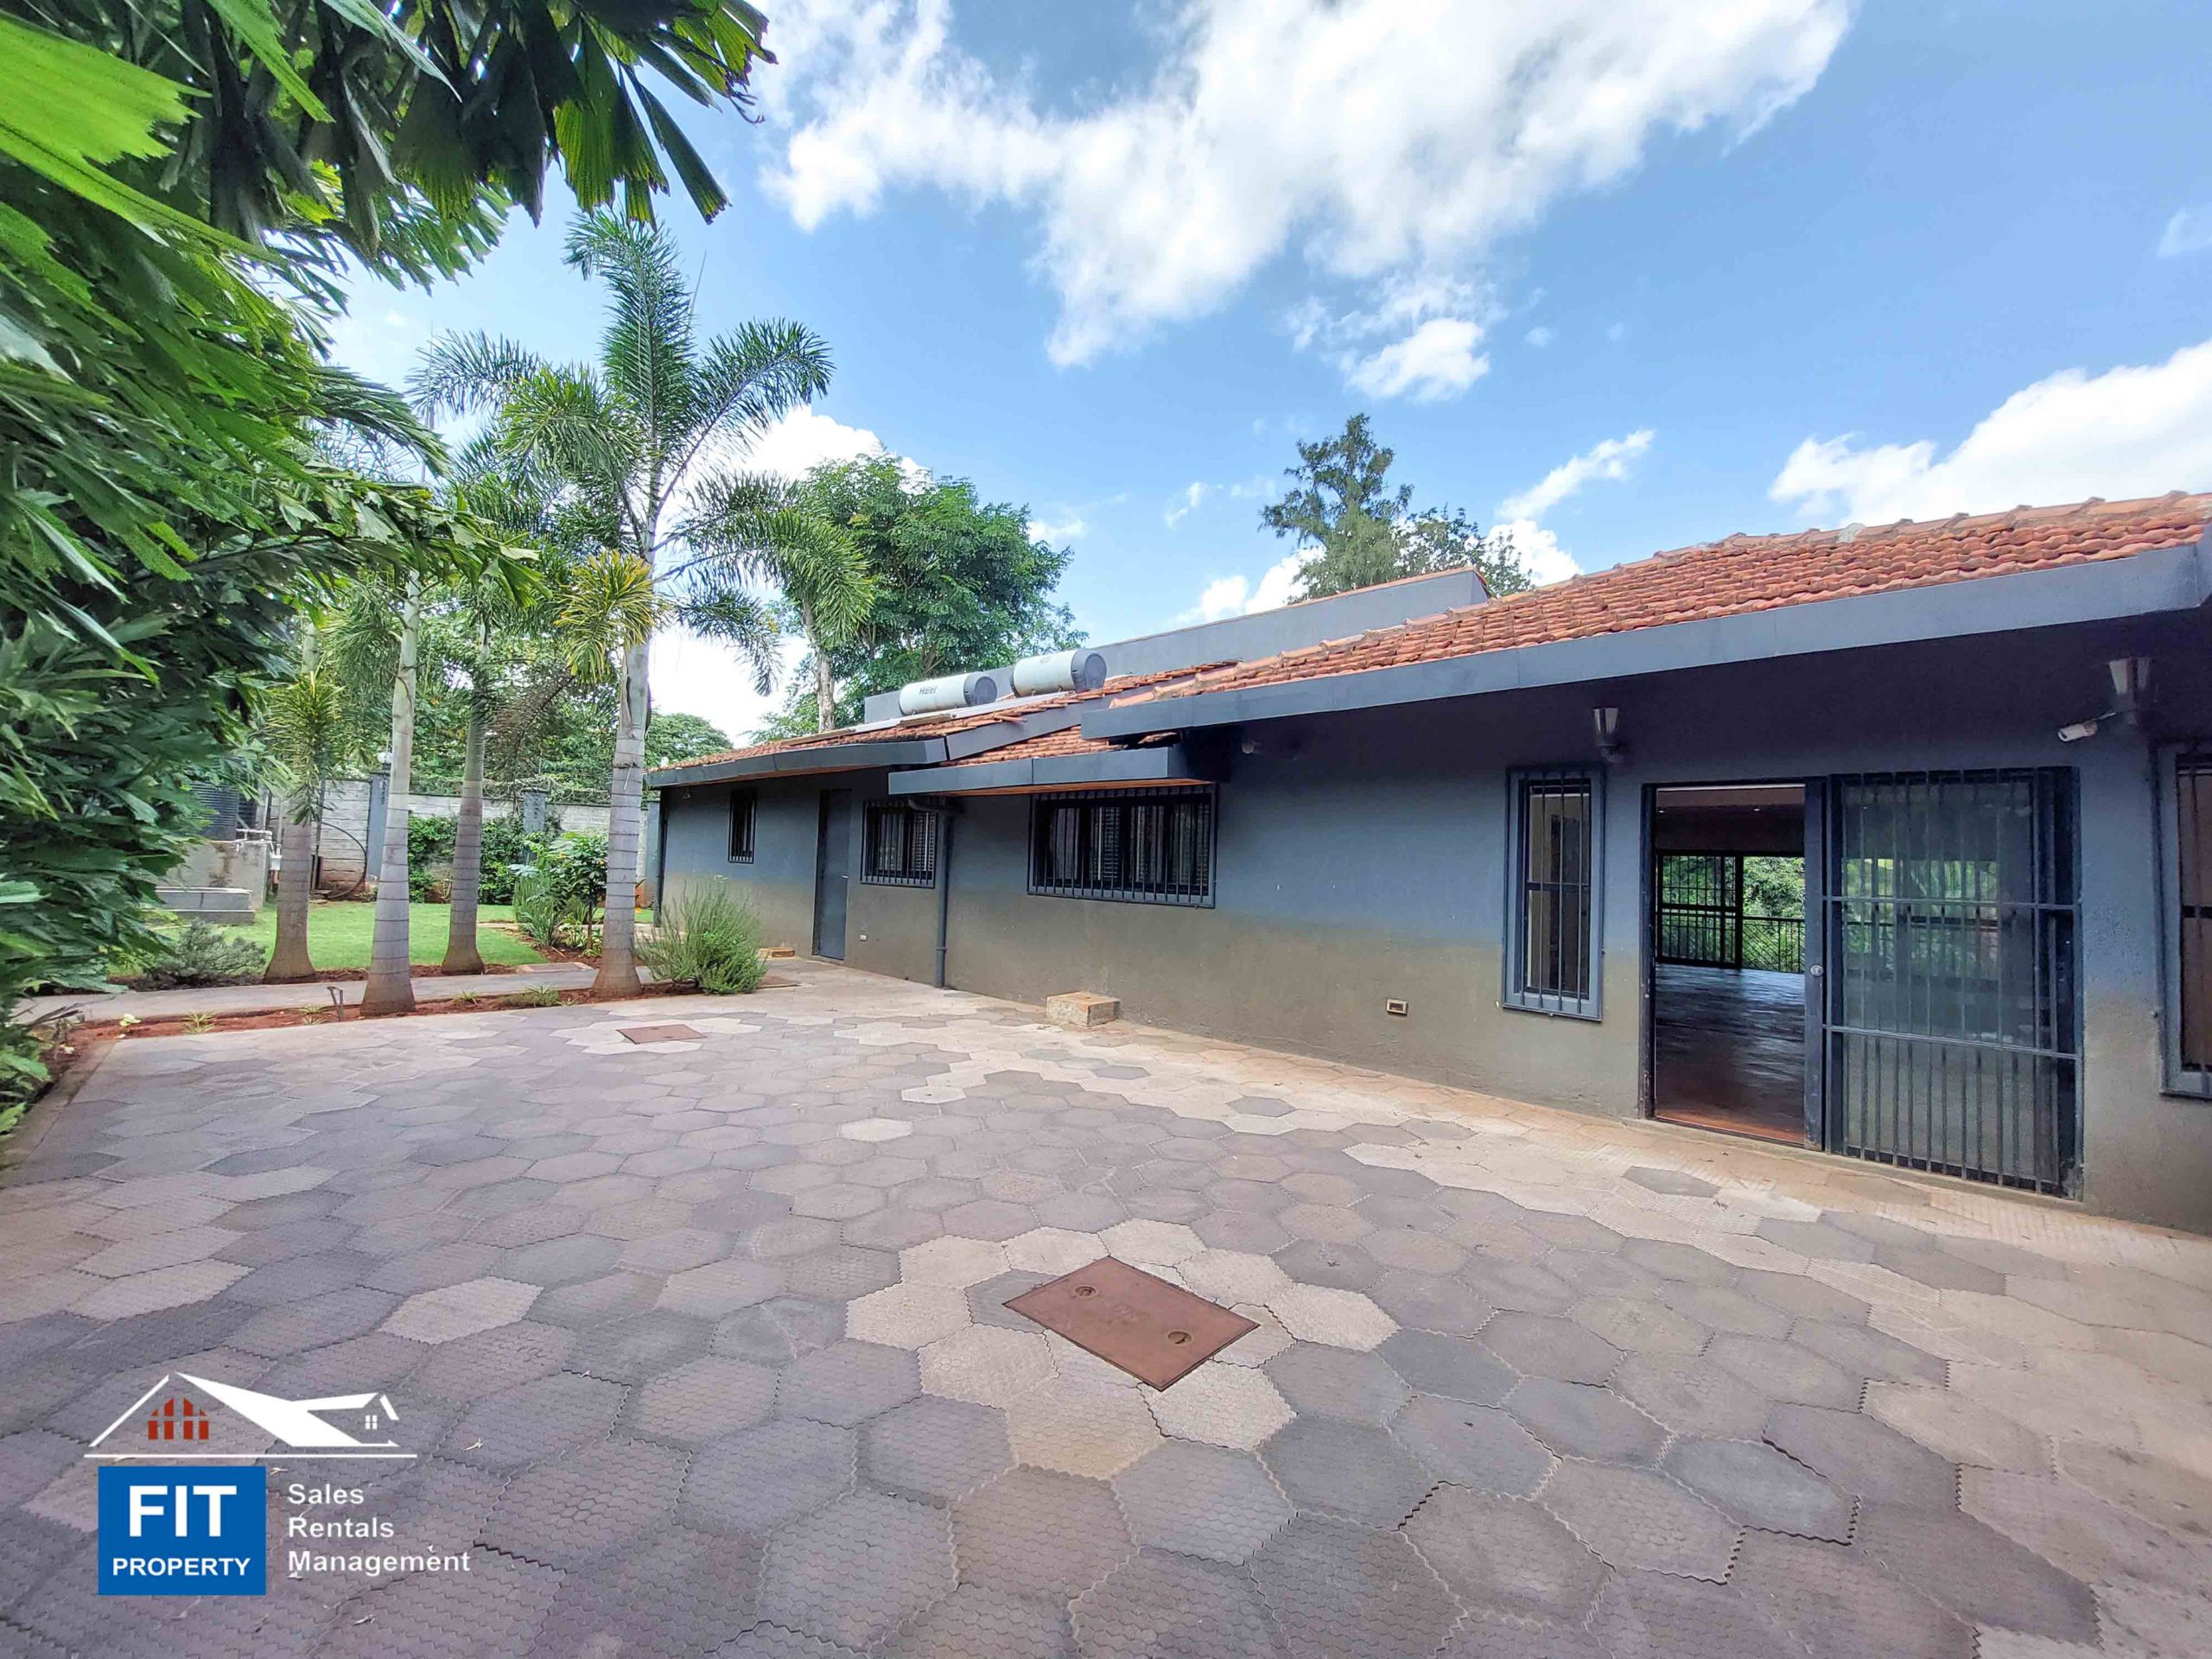 Modern 4 Bedroom Home for Rent in Nyari Central. Situated on a mature, flat half-acre garden. Enhanced Security: CCTV cameras. Rent: $4,000 FIT PROPERTY